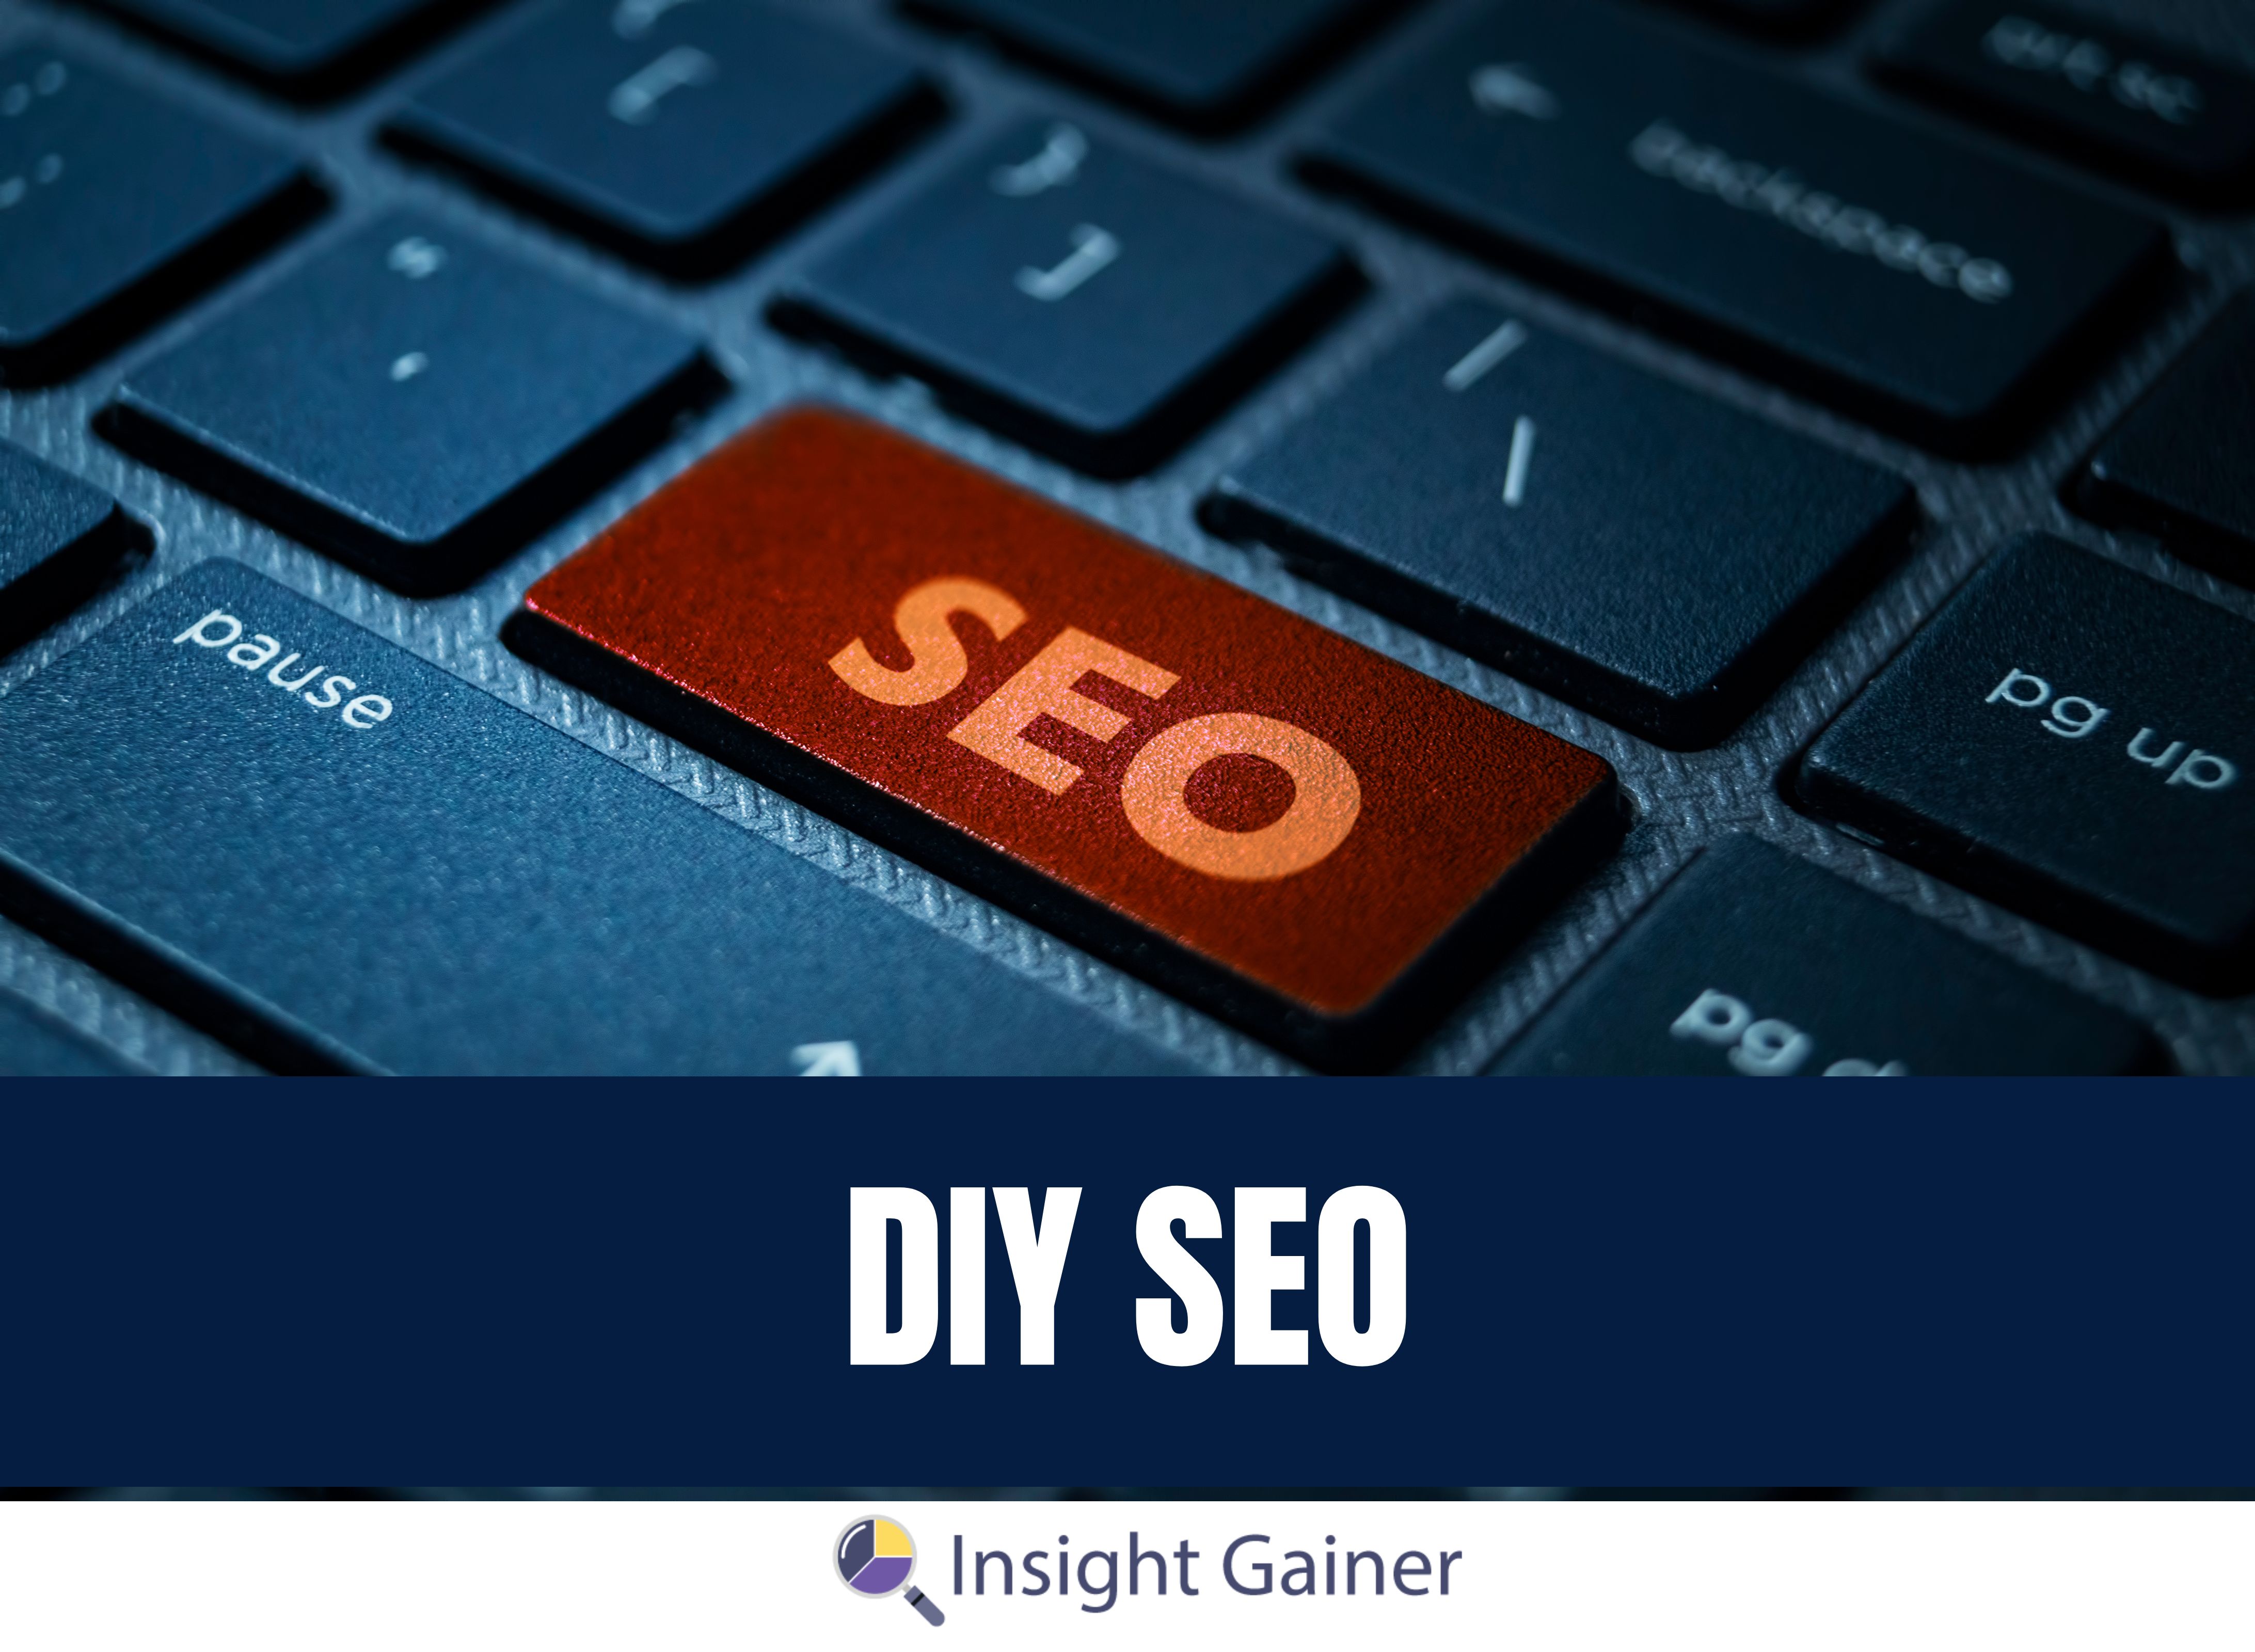 DIY SEO: 5 Simple Steps for Achieving Results